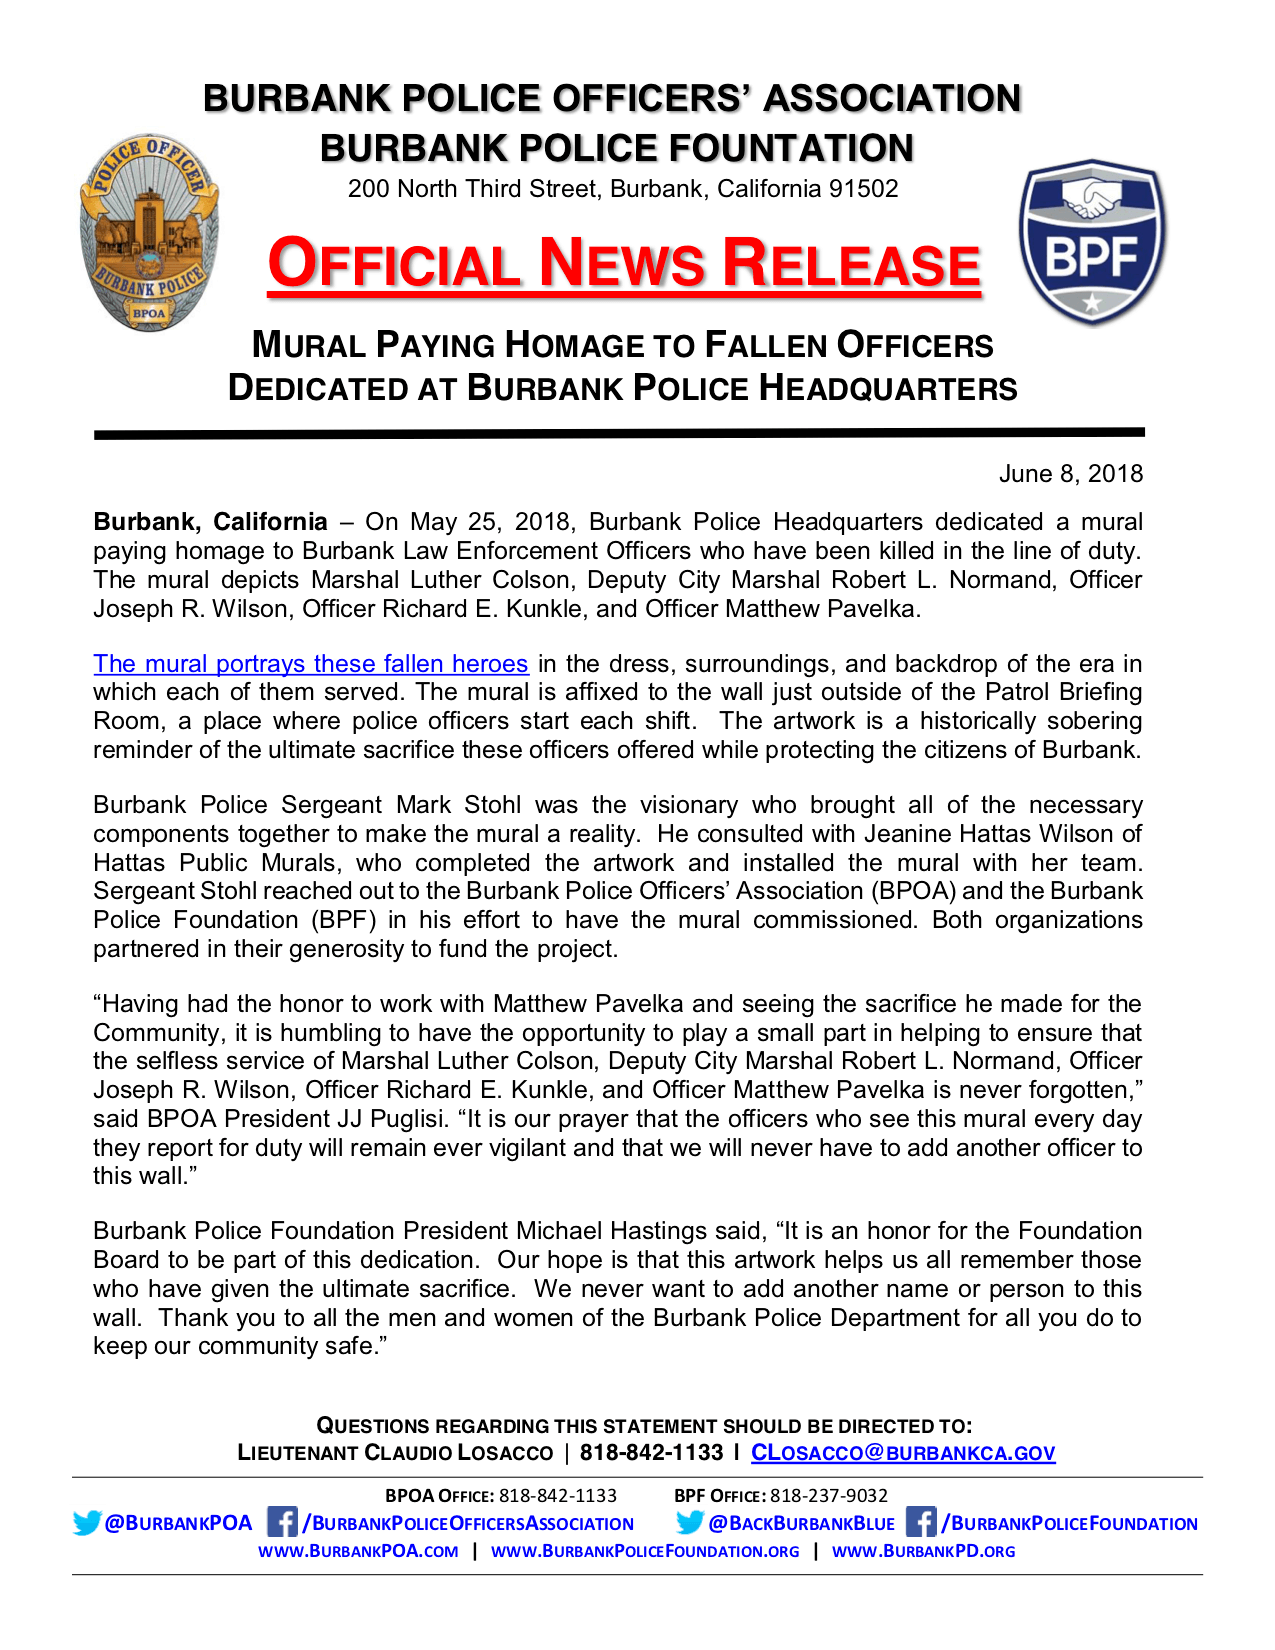 BPOA-BPF-News-Release---Mural-Paying-Homage-to-Fallen-Officers-Dedicated-at-Burbank-Police-Headquarters